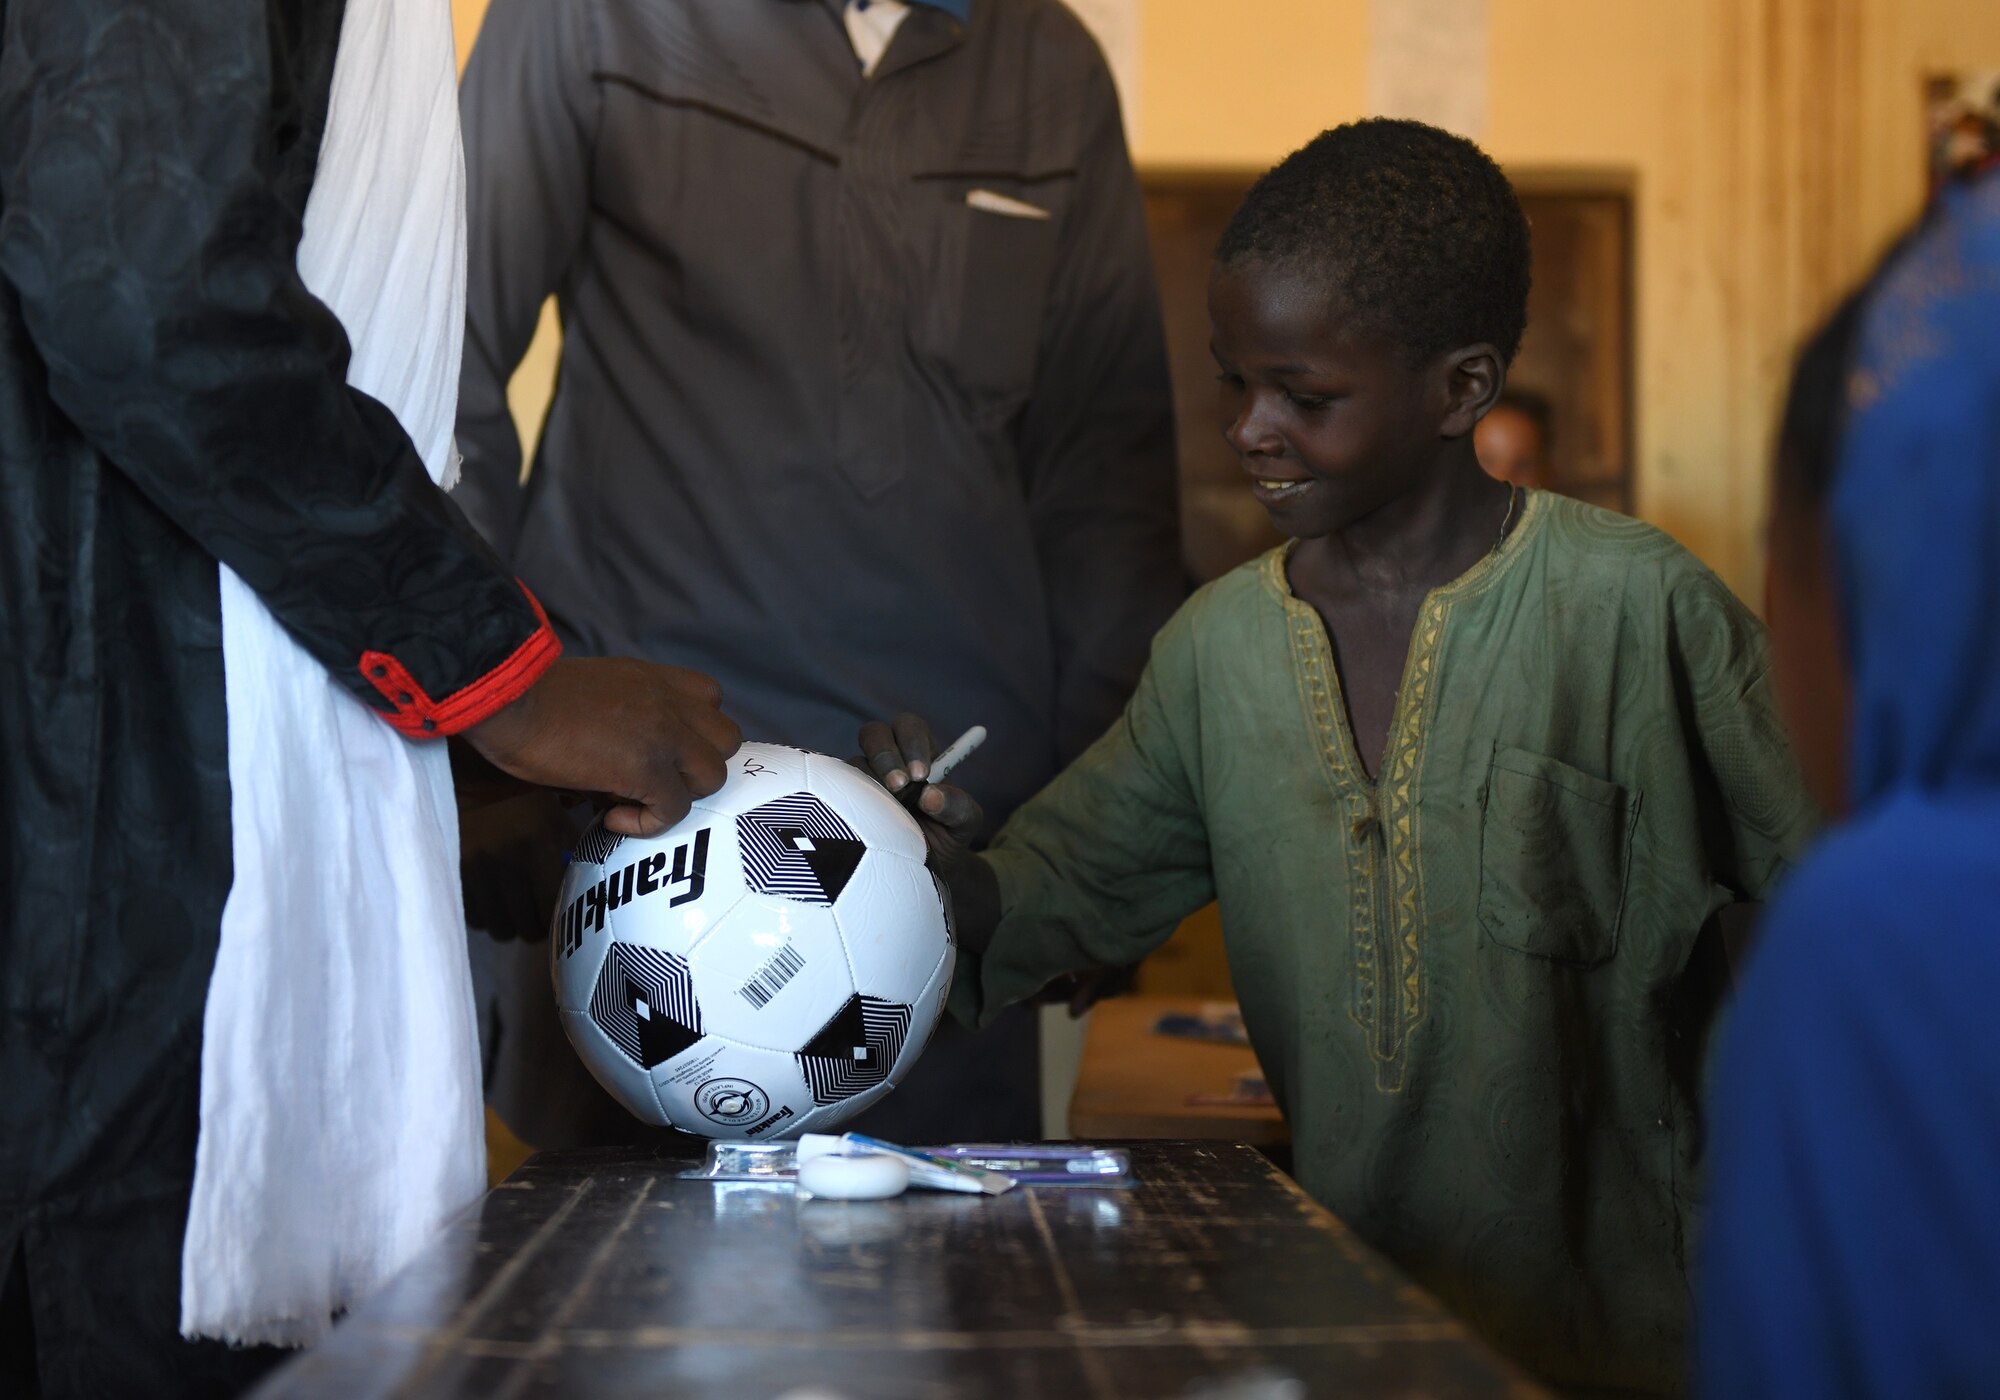 A local student signs his name on a soccer ball in commemoration of the first ever dental hygiene course in the village of Tsakatalam, Niger, Dec. 14, 2019. The U.S. Army 443rd Civil Affairs Battalion Civil Affairs Team 219 deployed to Nigerien Air Base 201 partnered with local Agadez city dentist, Dr. Mahaman Aicha, to teach the Tsakatalam Primary School students for the first time how to properly brush and floss their teeth and the importance of good oral health. (U.S. Air Force photo by Staff Sgt. Alex Fox Echols III)